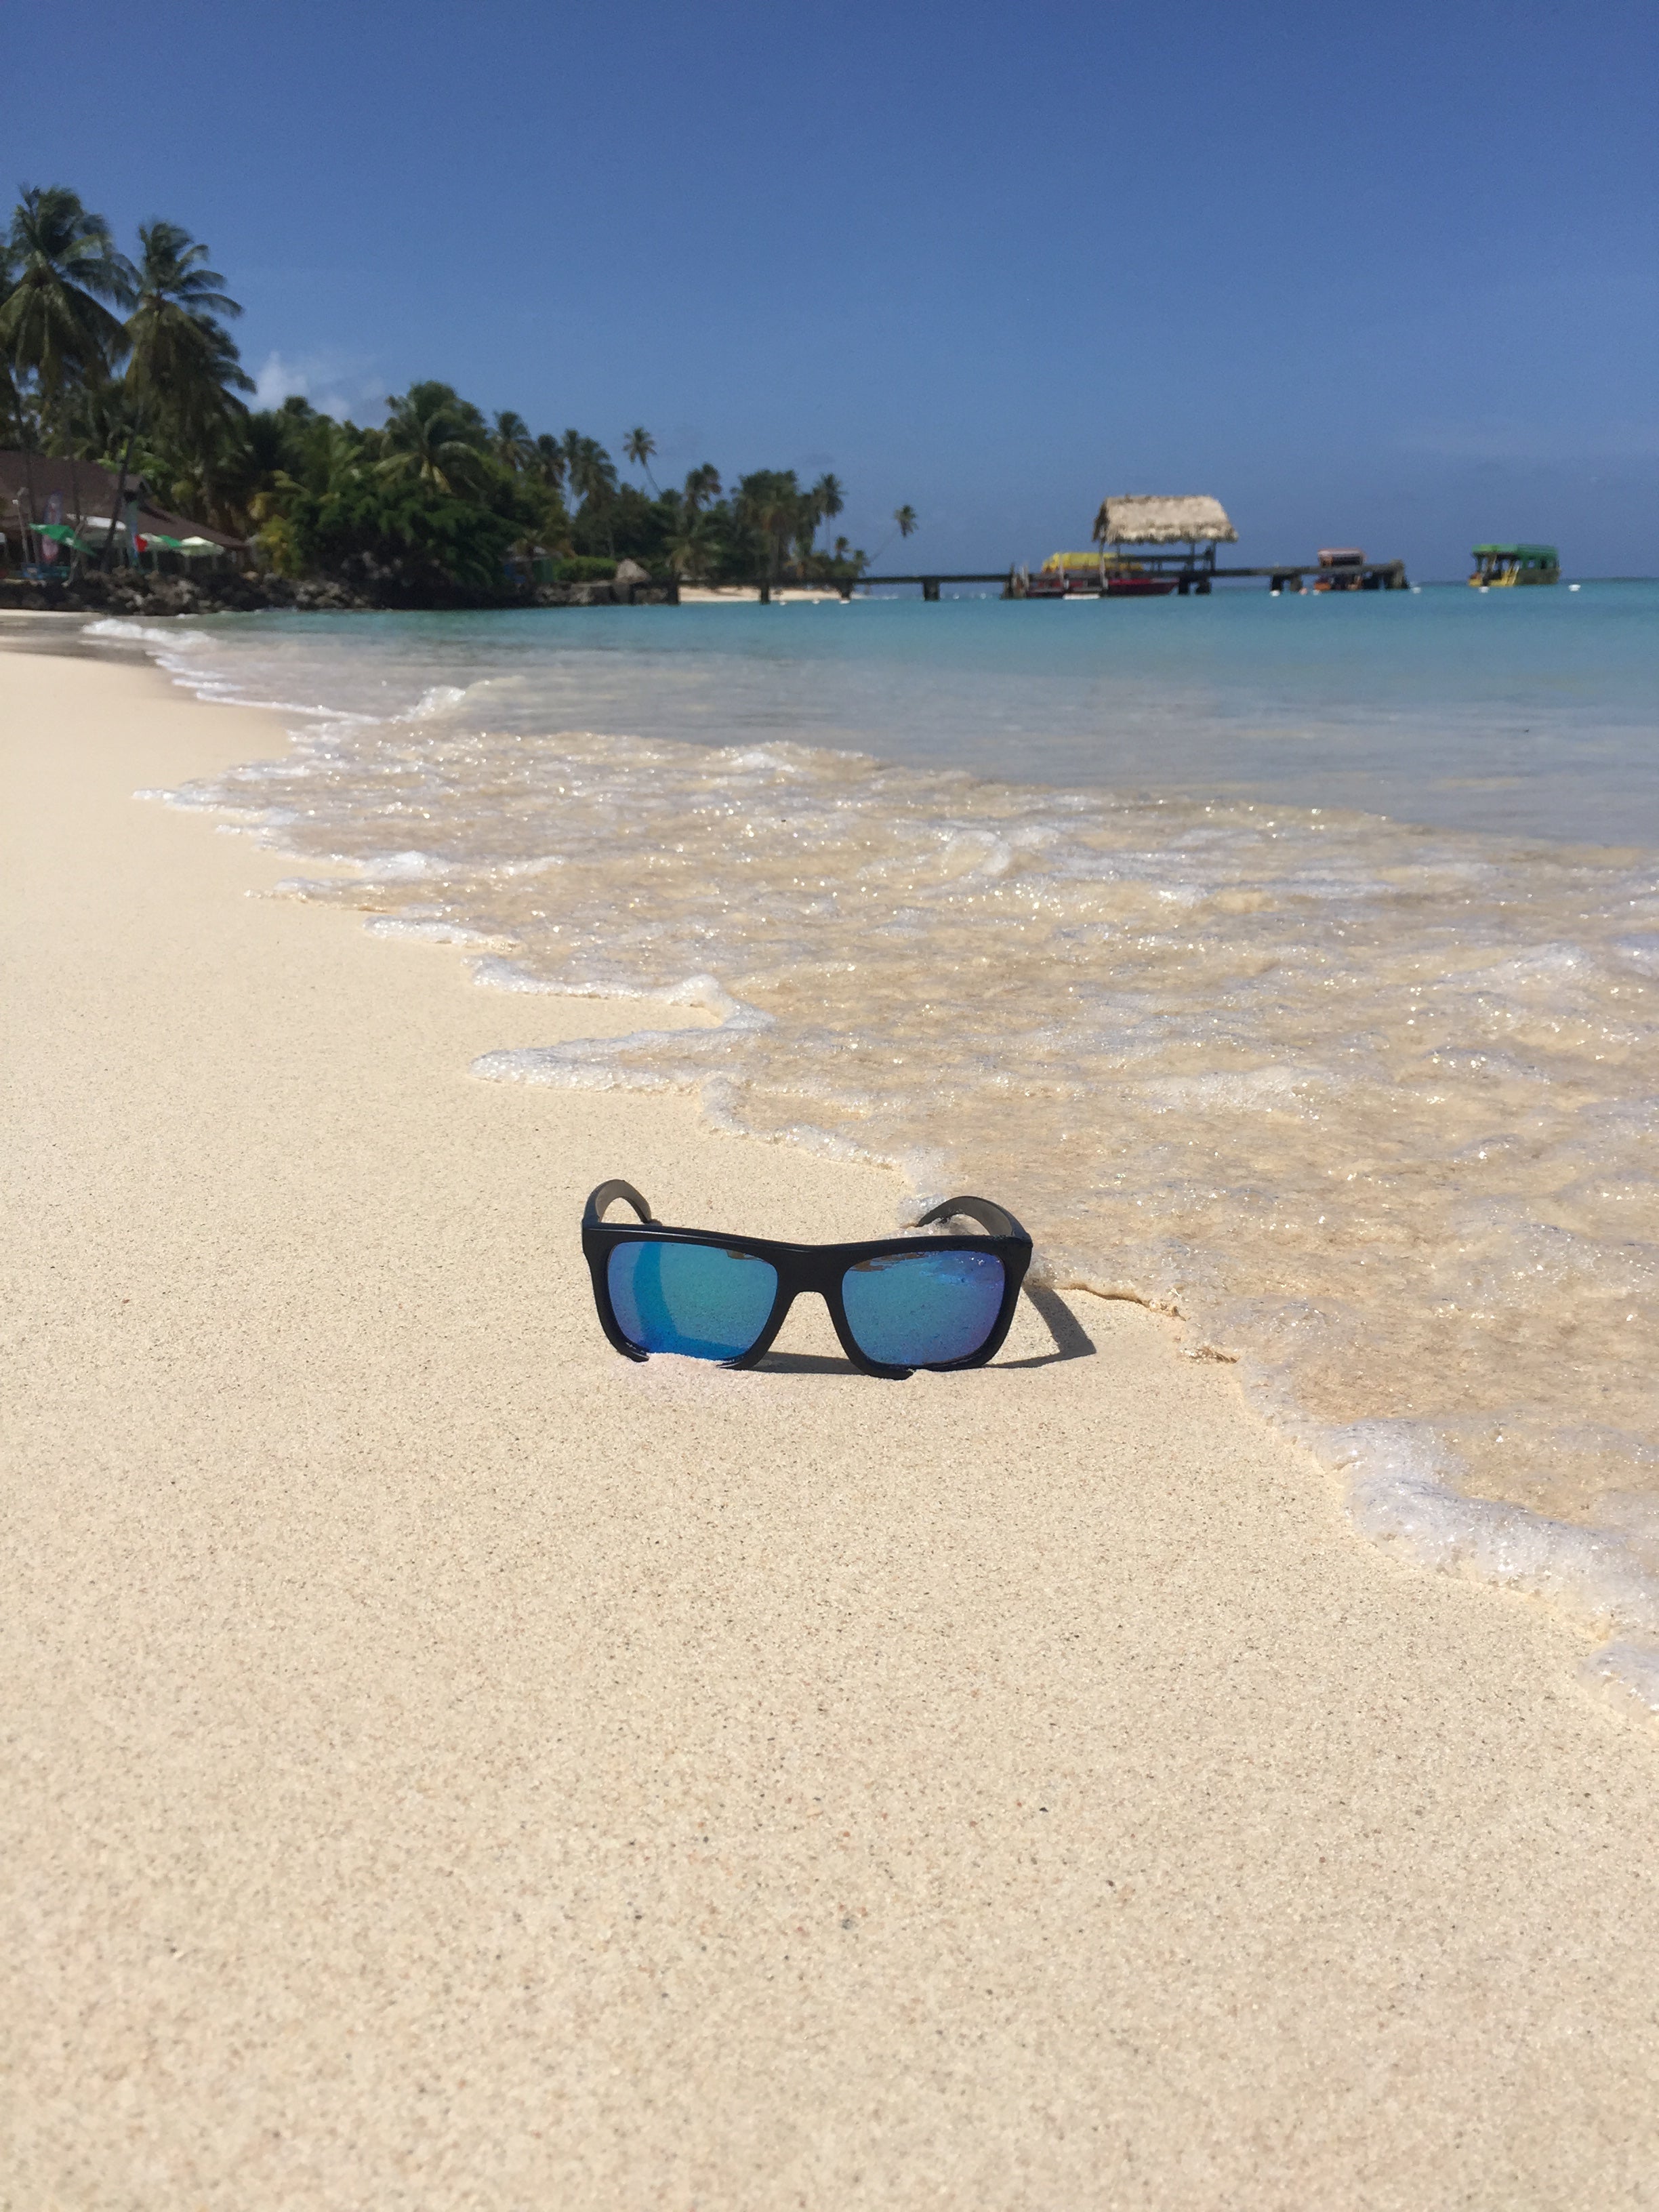 STAGE Cast Sunglasses with Blue Revo Lenses sitting on a beach with water next to them.